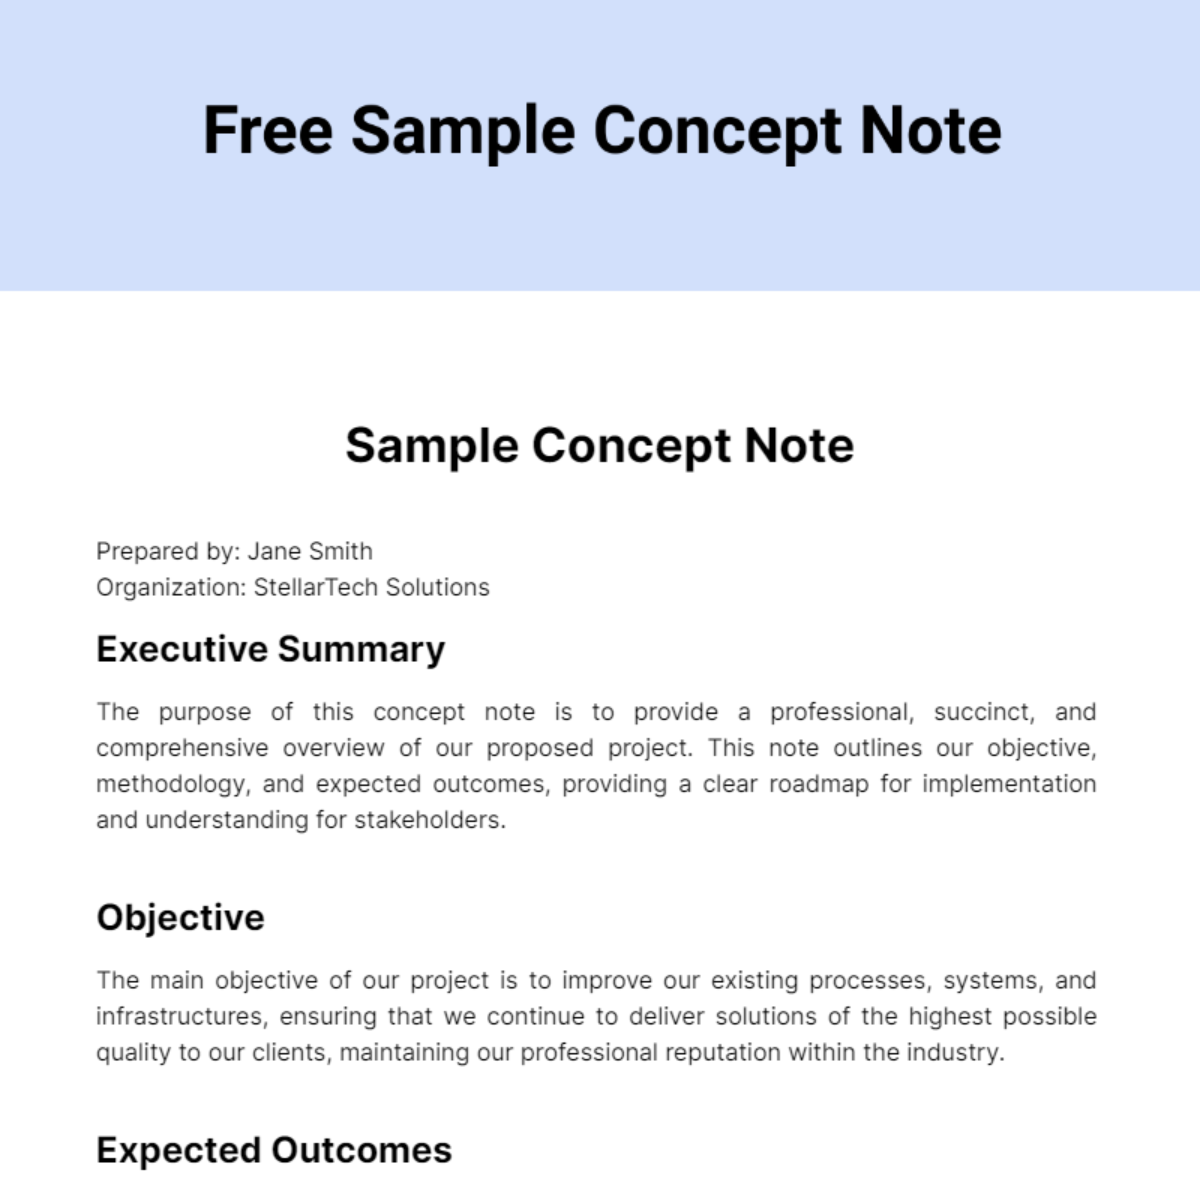 Free Sample Concept Note Template